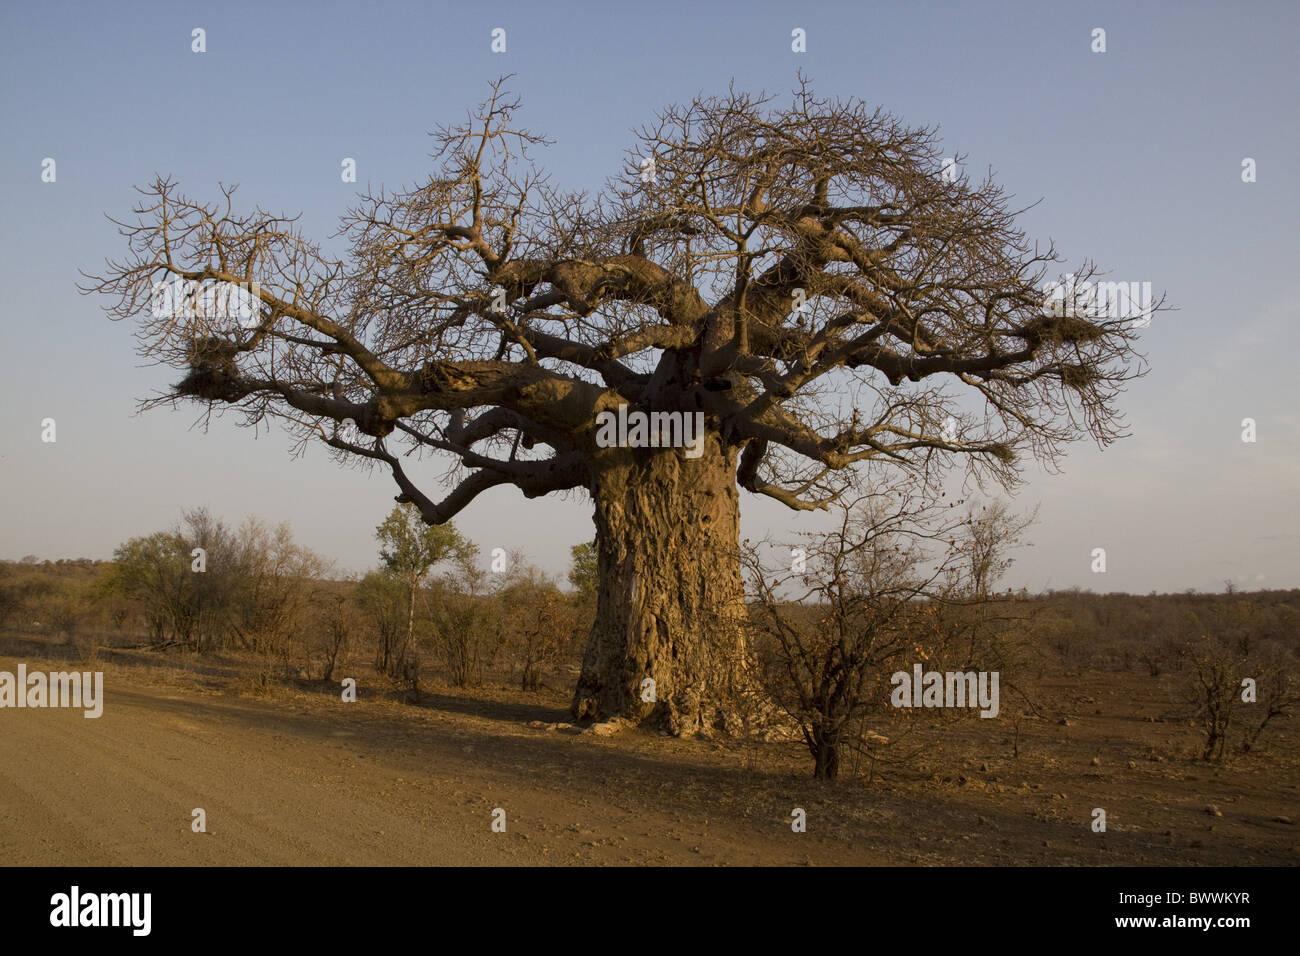 Baobab tree showing considerable damage from Stock Photo